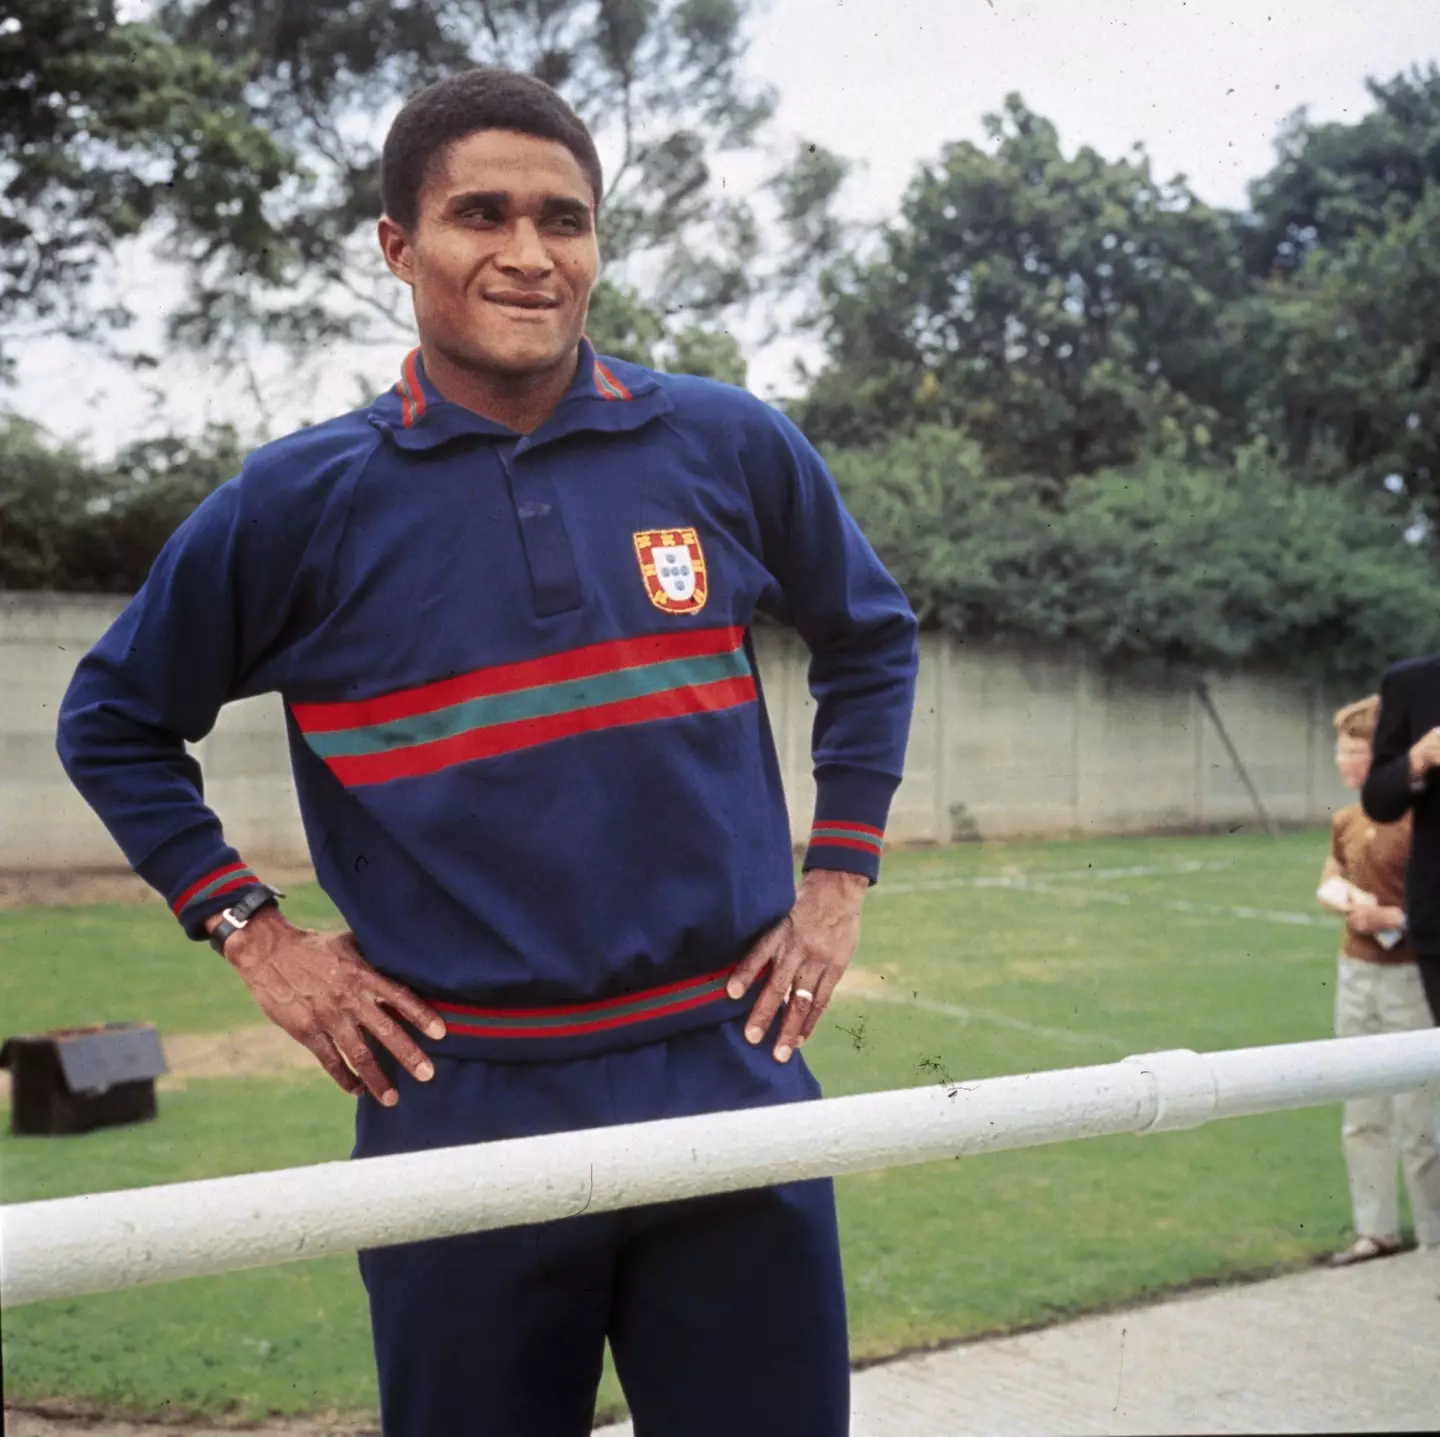 Eusebio is one of Portugal's greatest ever players (